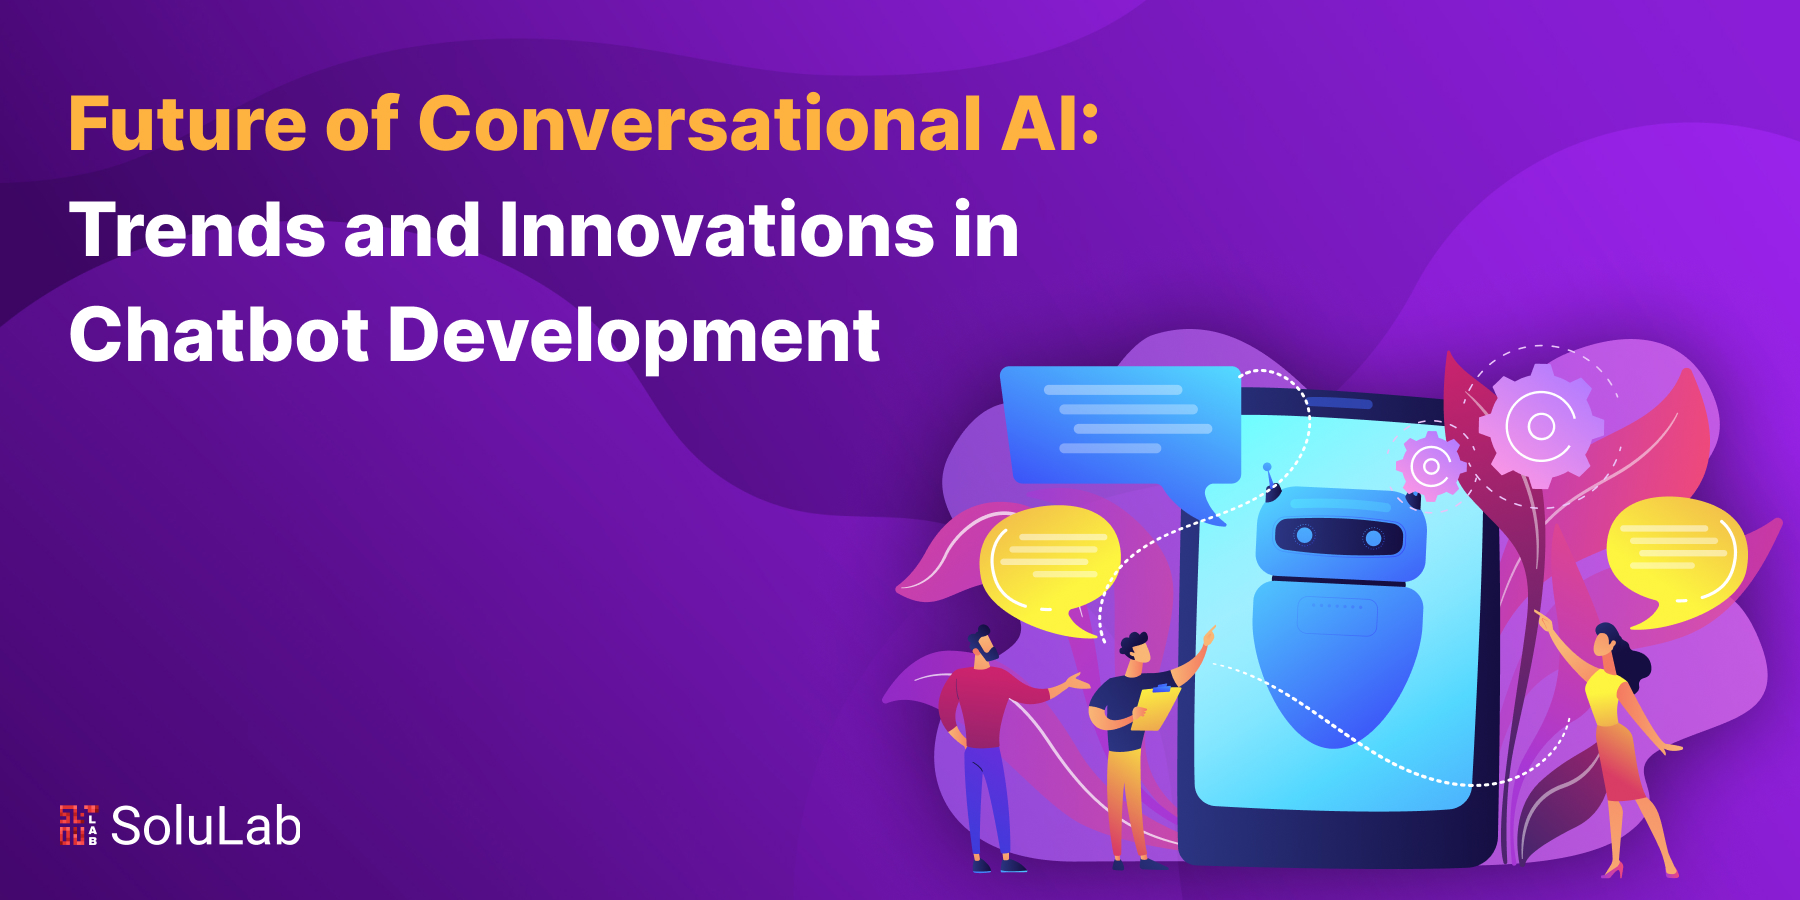 The Future of Conversational AI: Trends and Innovations in Chatbot Development